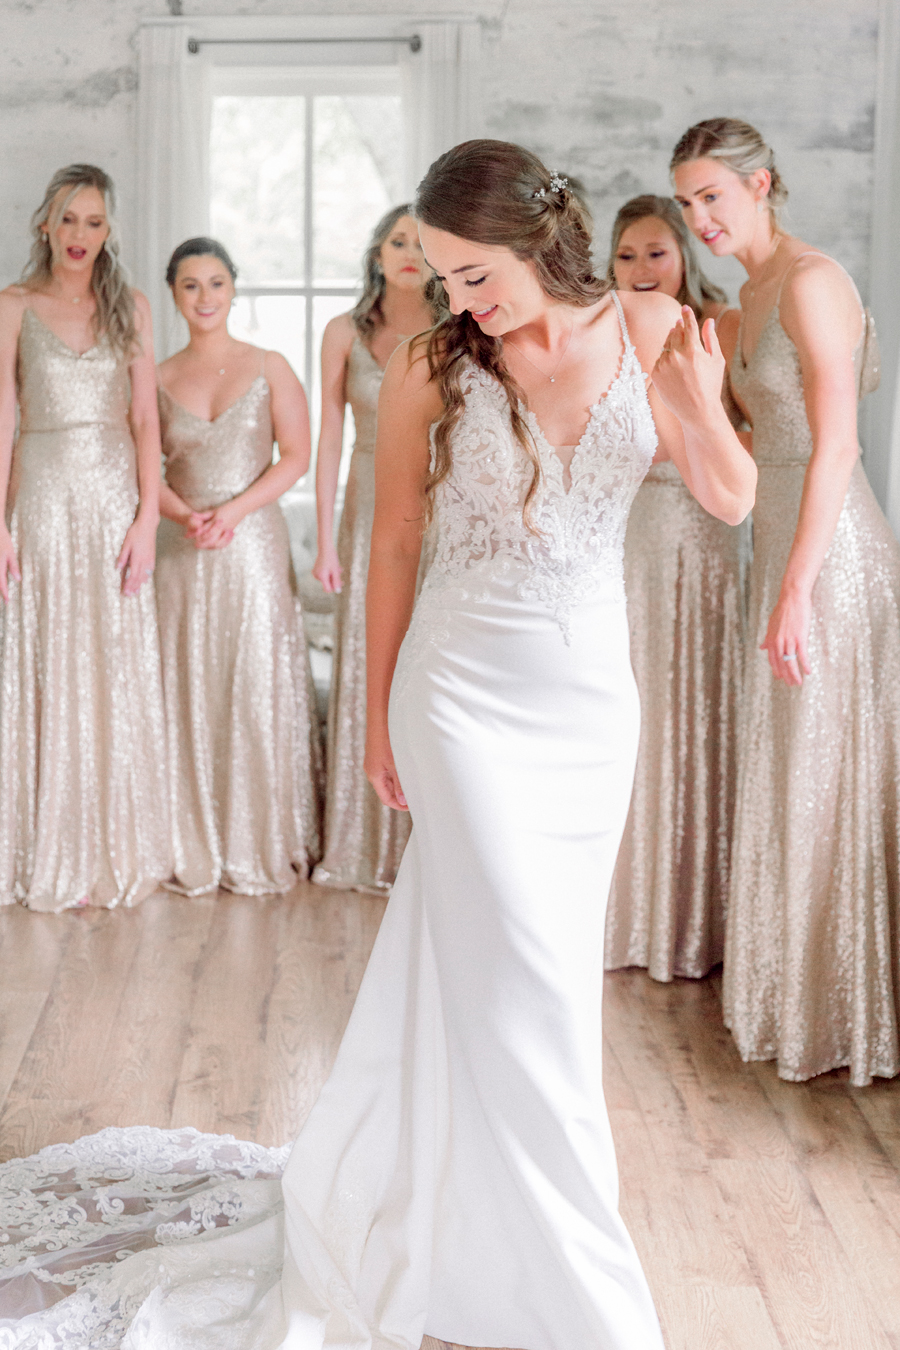 A bride does a first look with her bridesmaids at Wildcliff Weddings and Events.